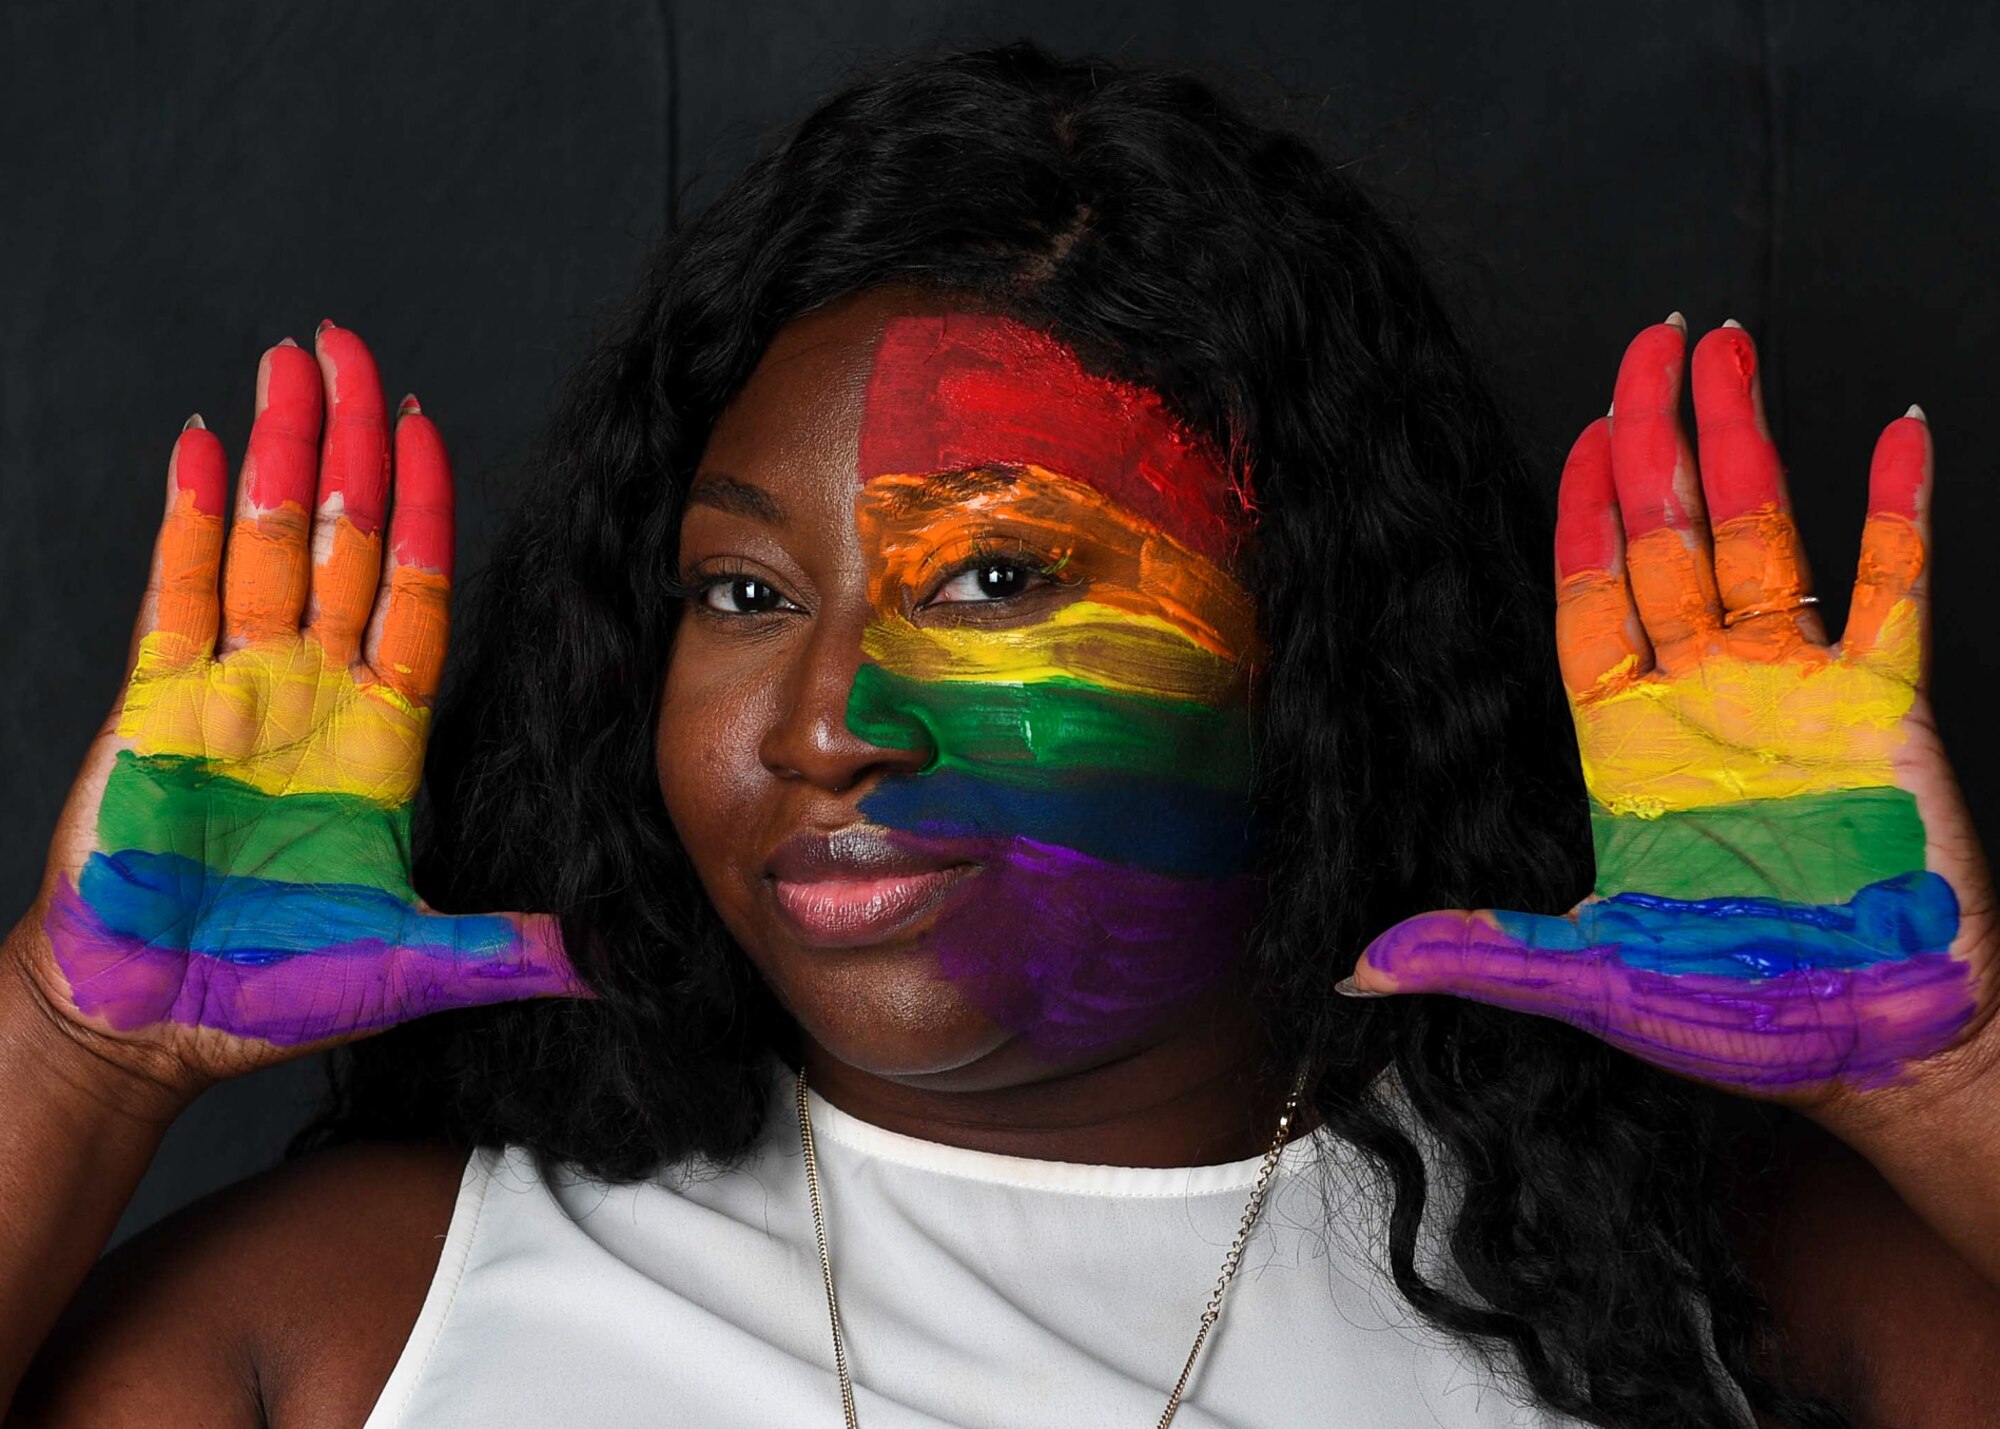 "I celebrate pride because of what it represents. Pride is a celebration of life. It is place where everyone is accepted. No prejudice. No judgements. Just people coming together in the name of love, humanity, and equality."-Jaukena Jackson-Albers, Team Ramstein member